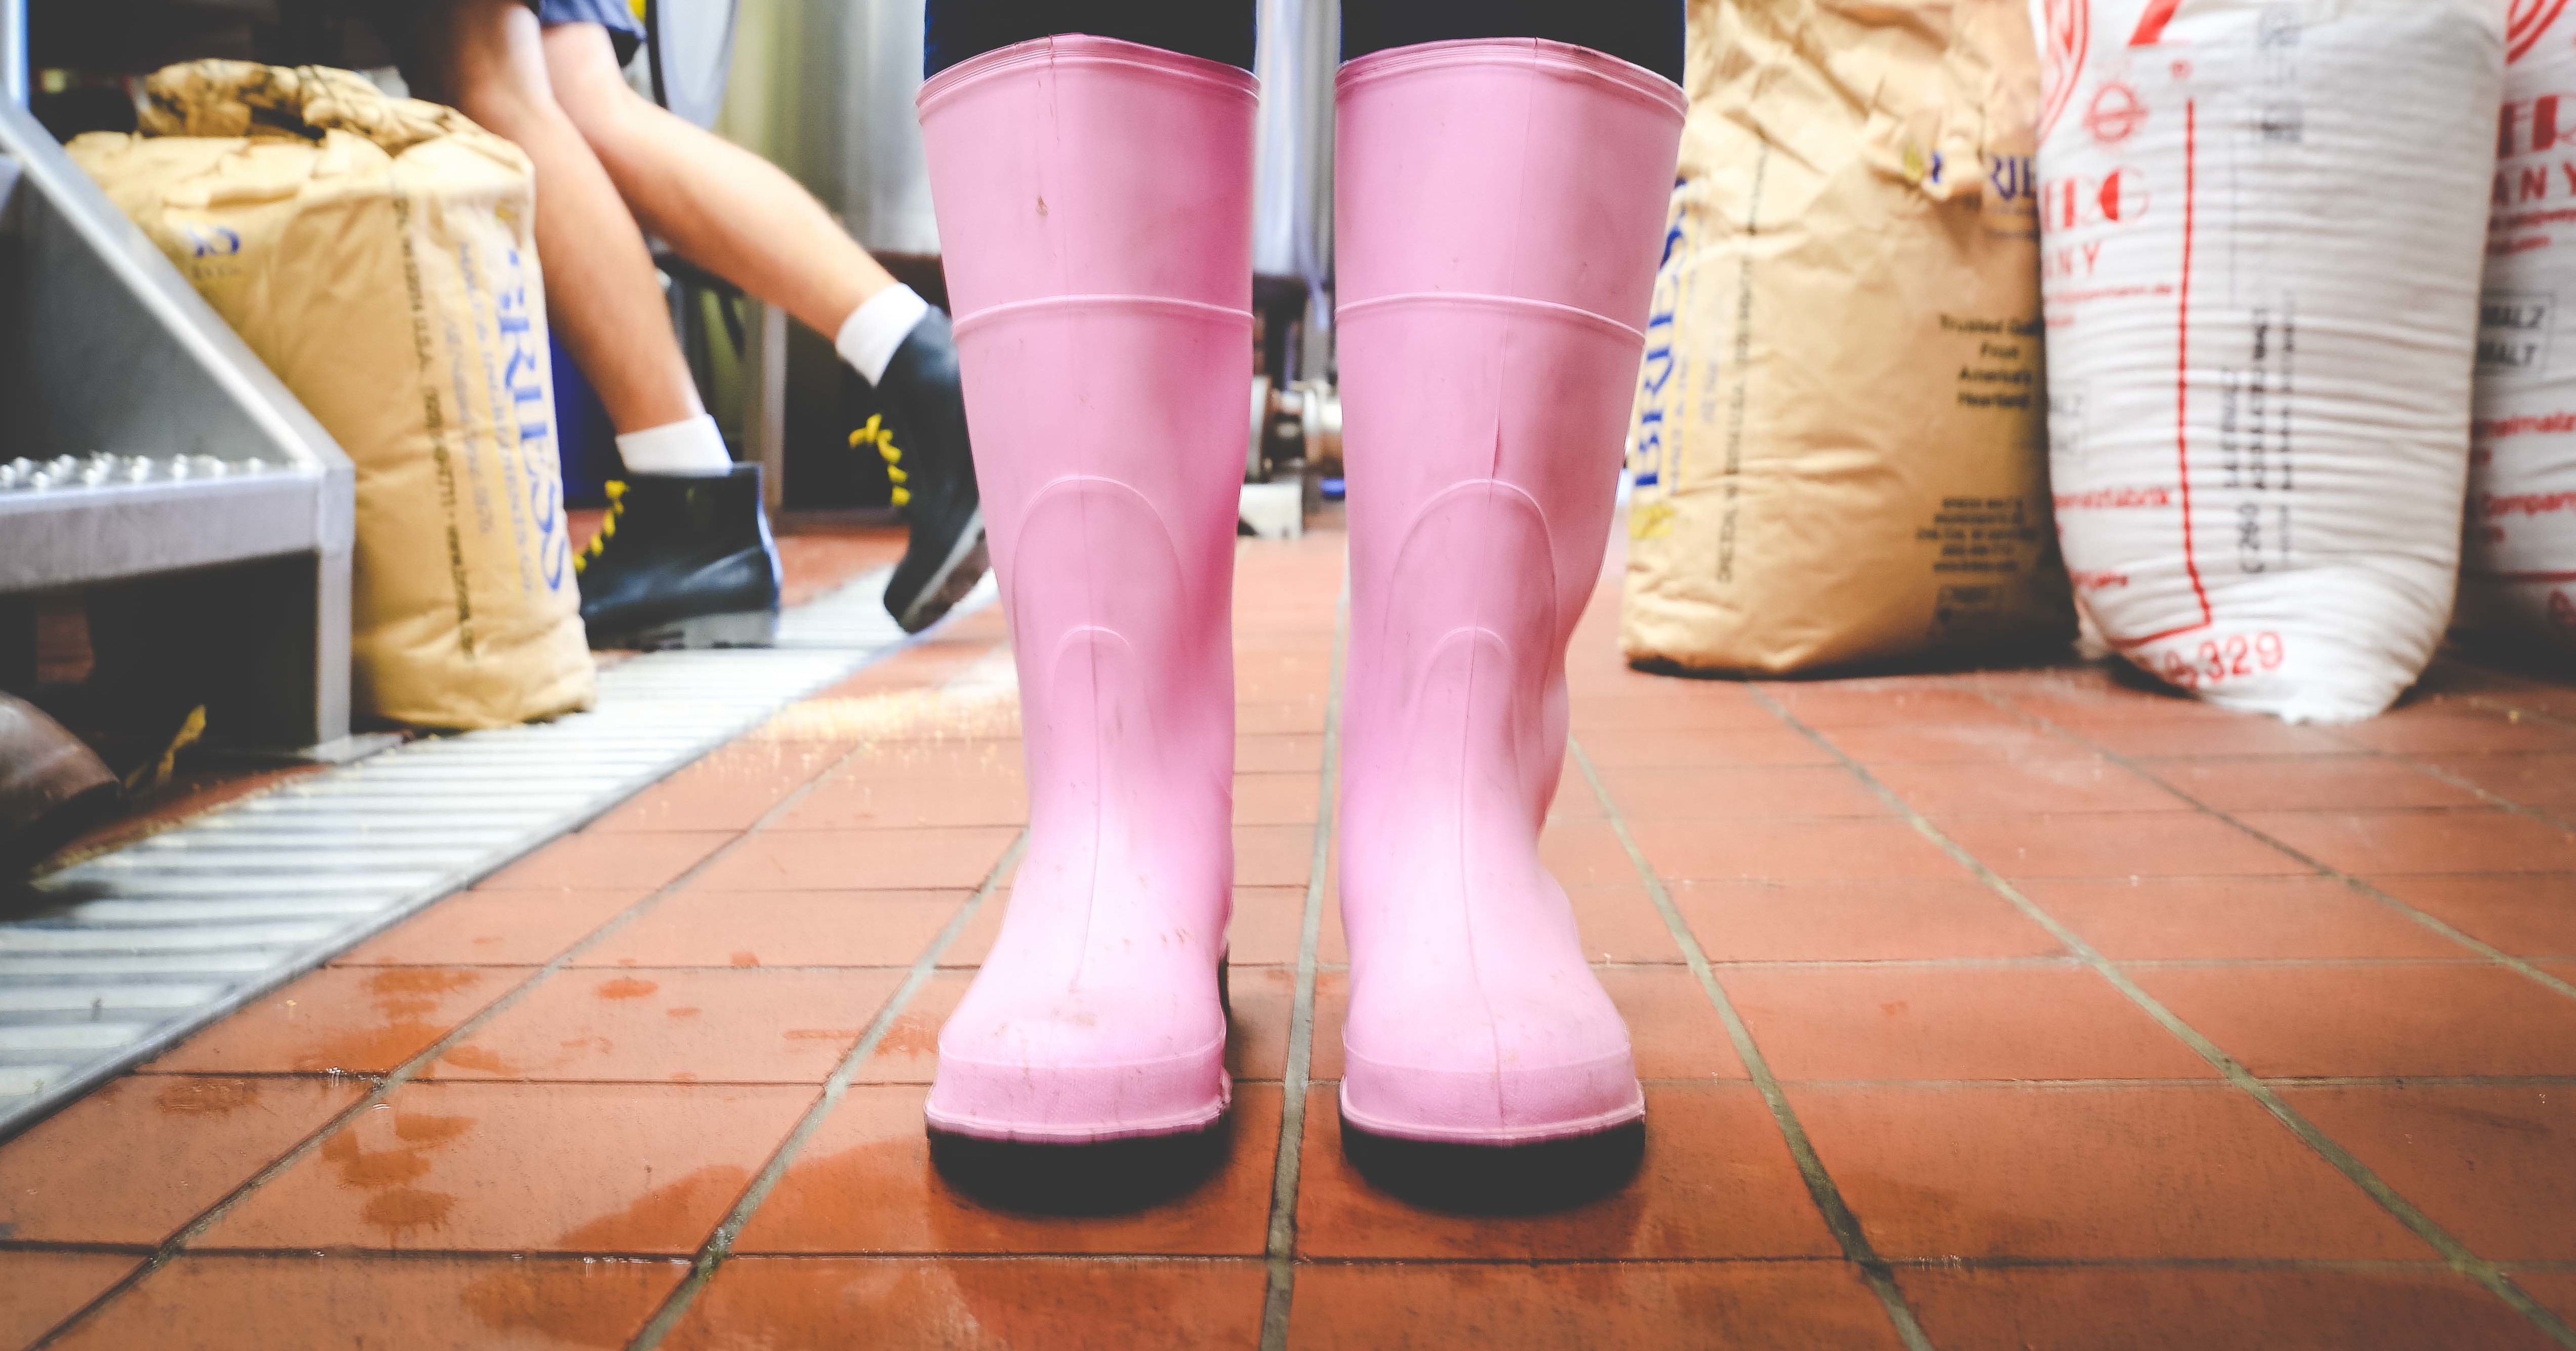 Celebrating International Women’s Day With A Pink Boots Brew